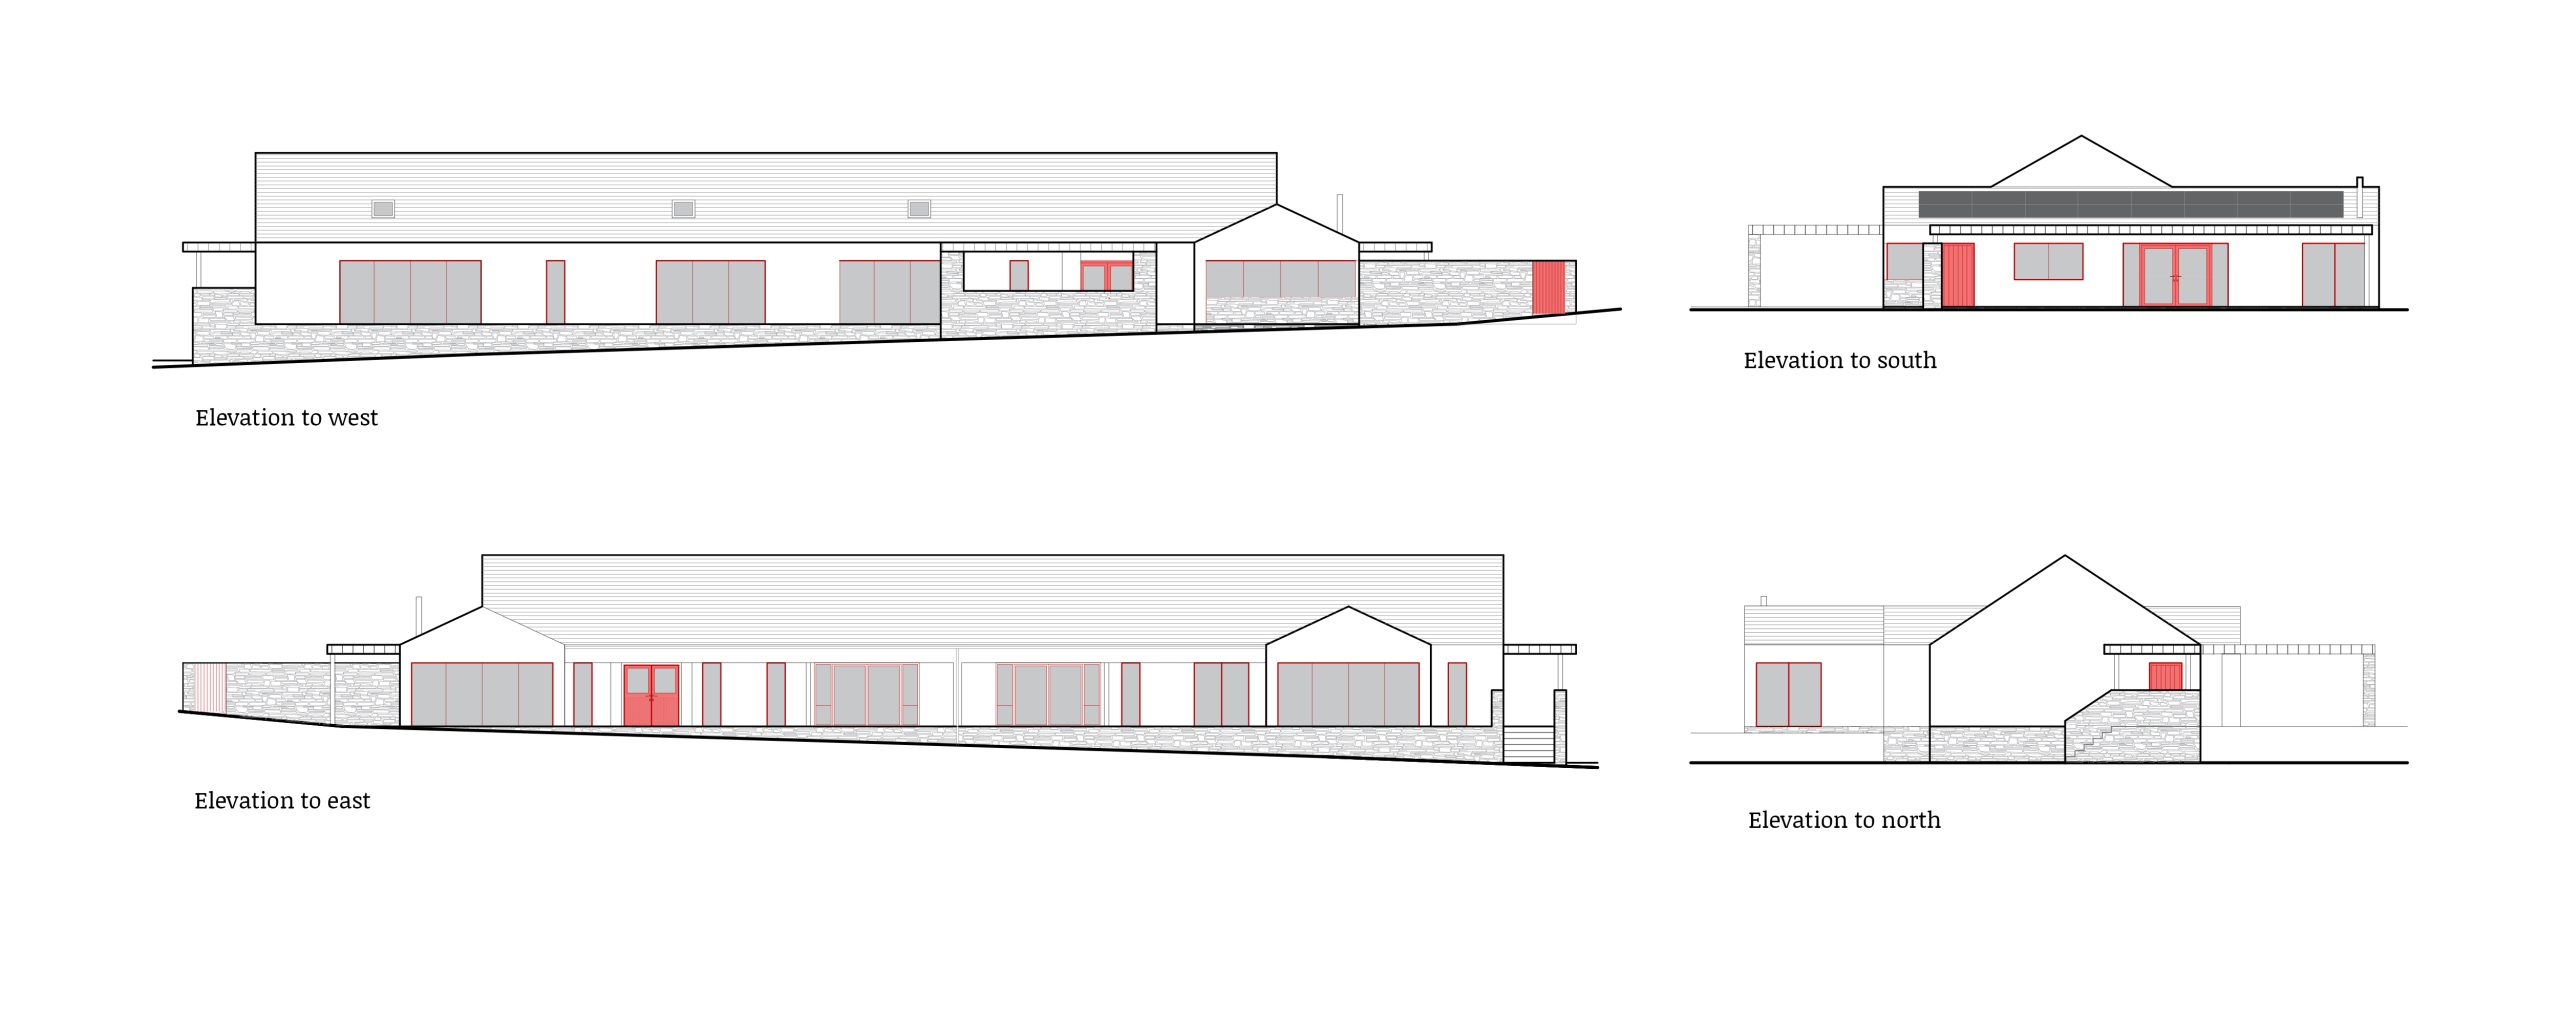 Proposed house near Rathmullan, Co. Donegal